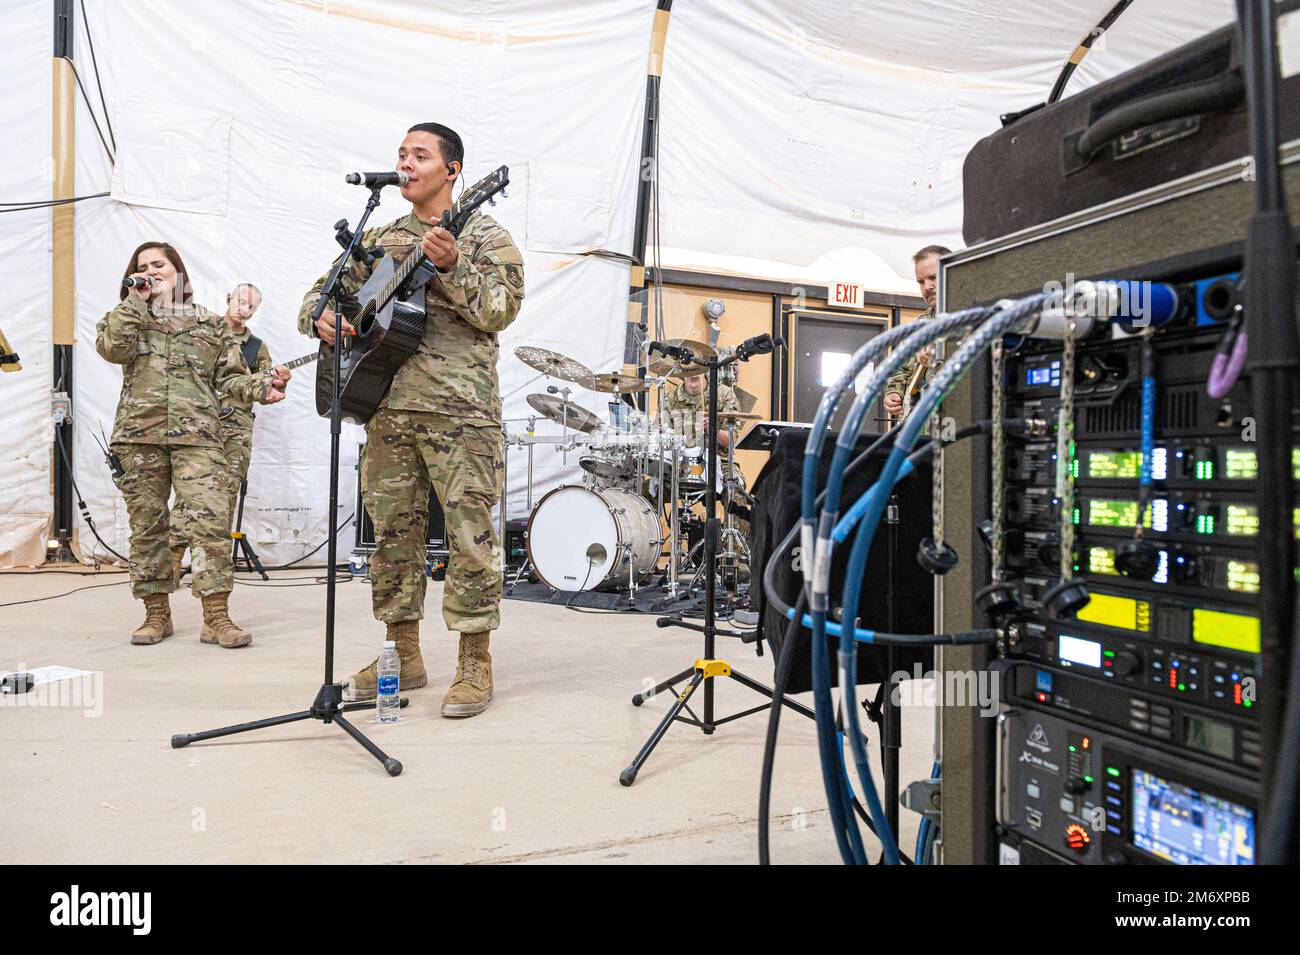 Members of the U.S. Air Force Central Command Band perform during the 378th Air Expeditionary Wing change of command ceremony at Prince Sultan Air Base, in the Kingdom of Saudi Arabia, May 9, 2022. During the ceremony Brig. Gen. Robert Davis relinquished command to Brig. Gen. William Betts. The tradition of change of command ceremonies are so that the unit can witness their new leader assume the responsibility and trust associated with the position of commander. Stock Photo